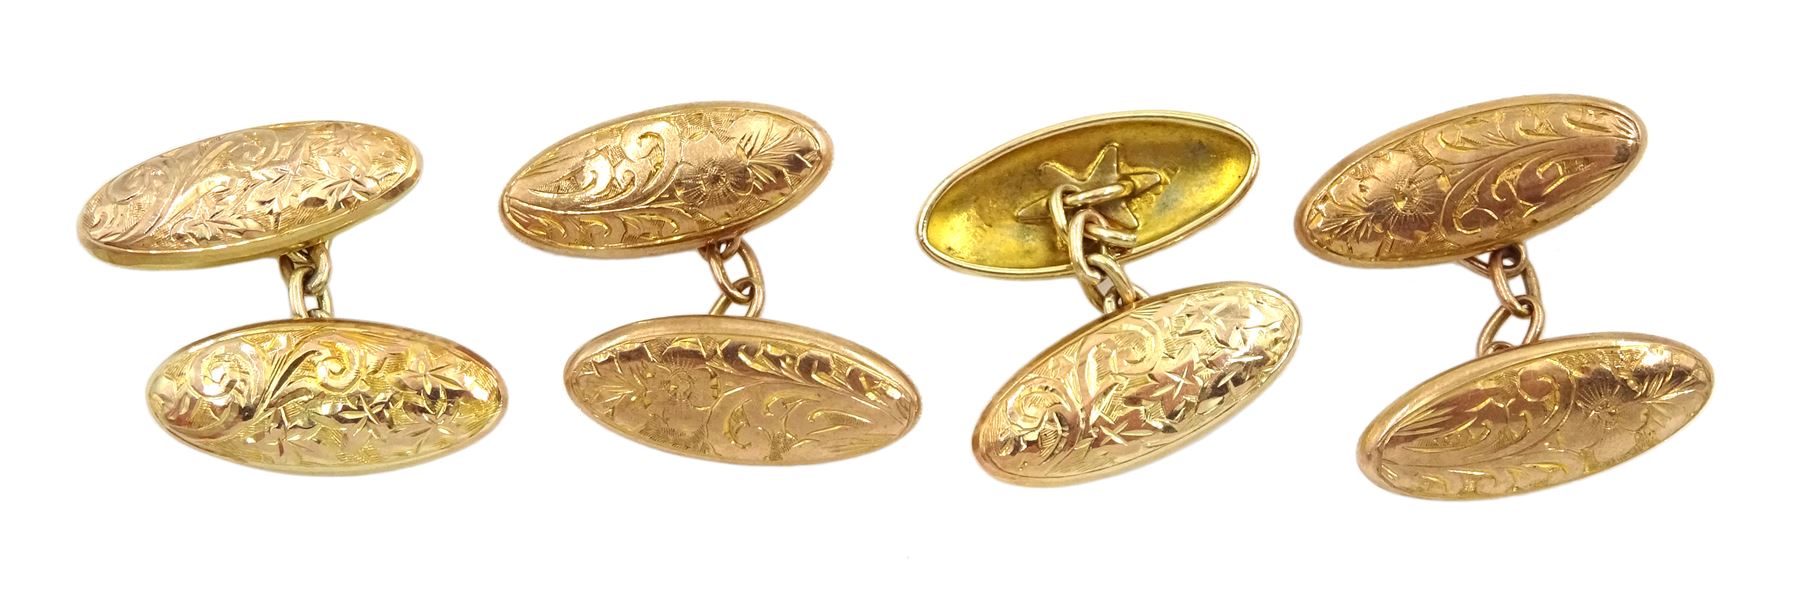 Pair of Edwardian 9ct gold cufflinks with engraved decoration